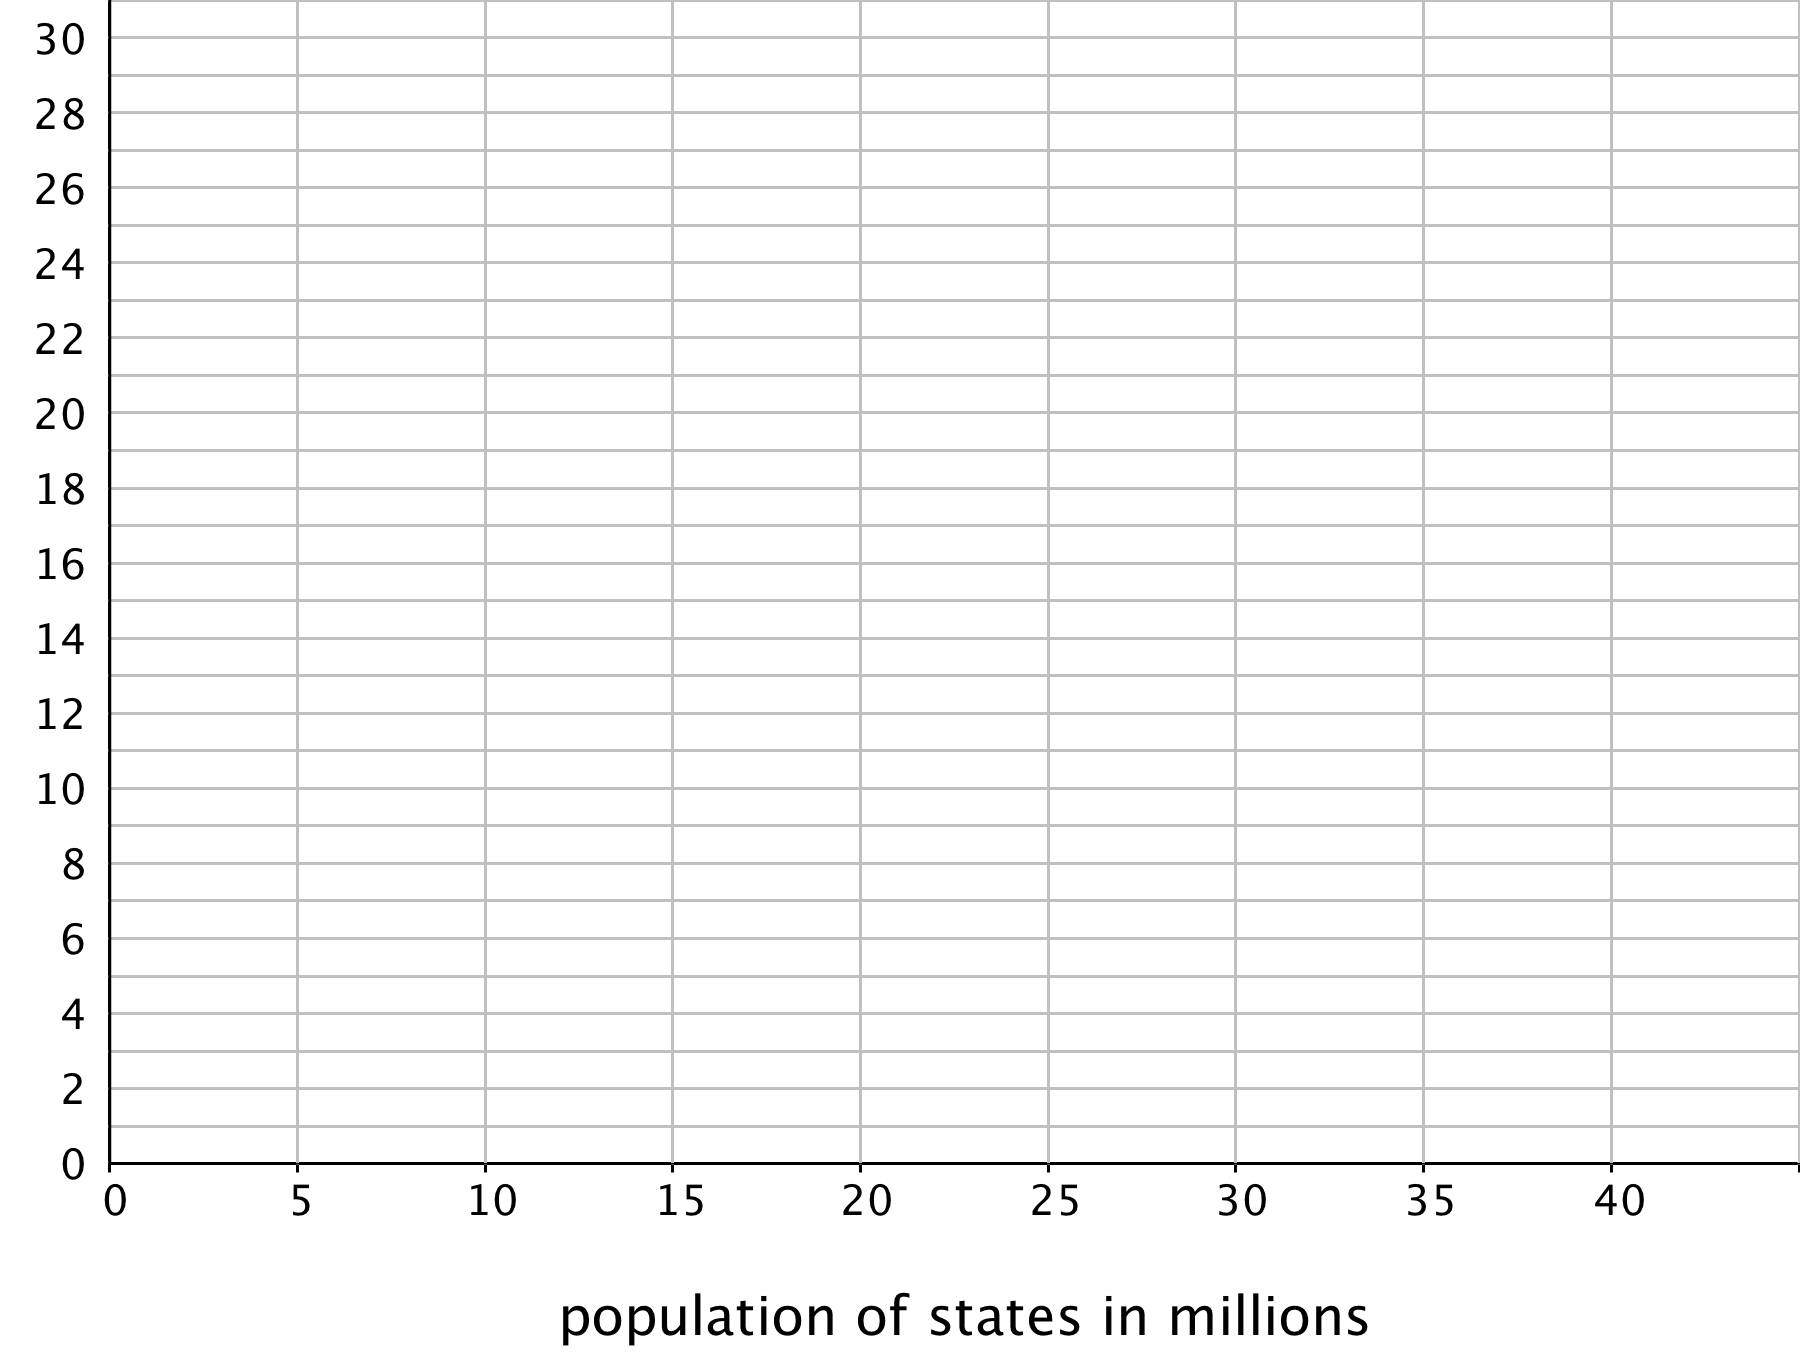 A blank grid: The horizontal axis is labeled “population of states in millions” and has the numbers 0 through 40, in increments of 5, indicated. The vertical axis has the numbers 0 through 30, in increments of 2, indicated and there are tick marks midway between each indicated number.